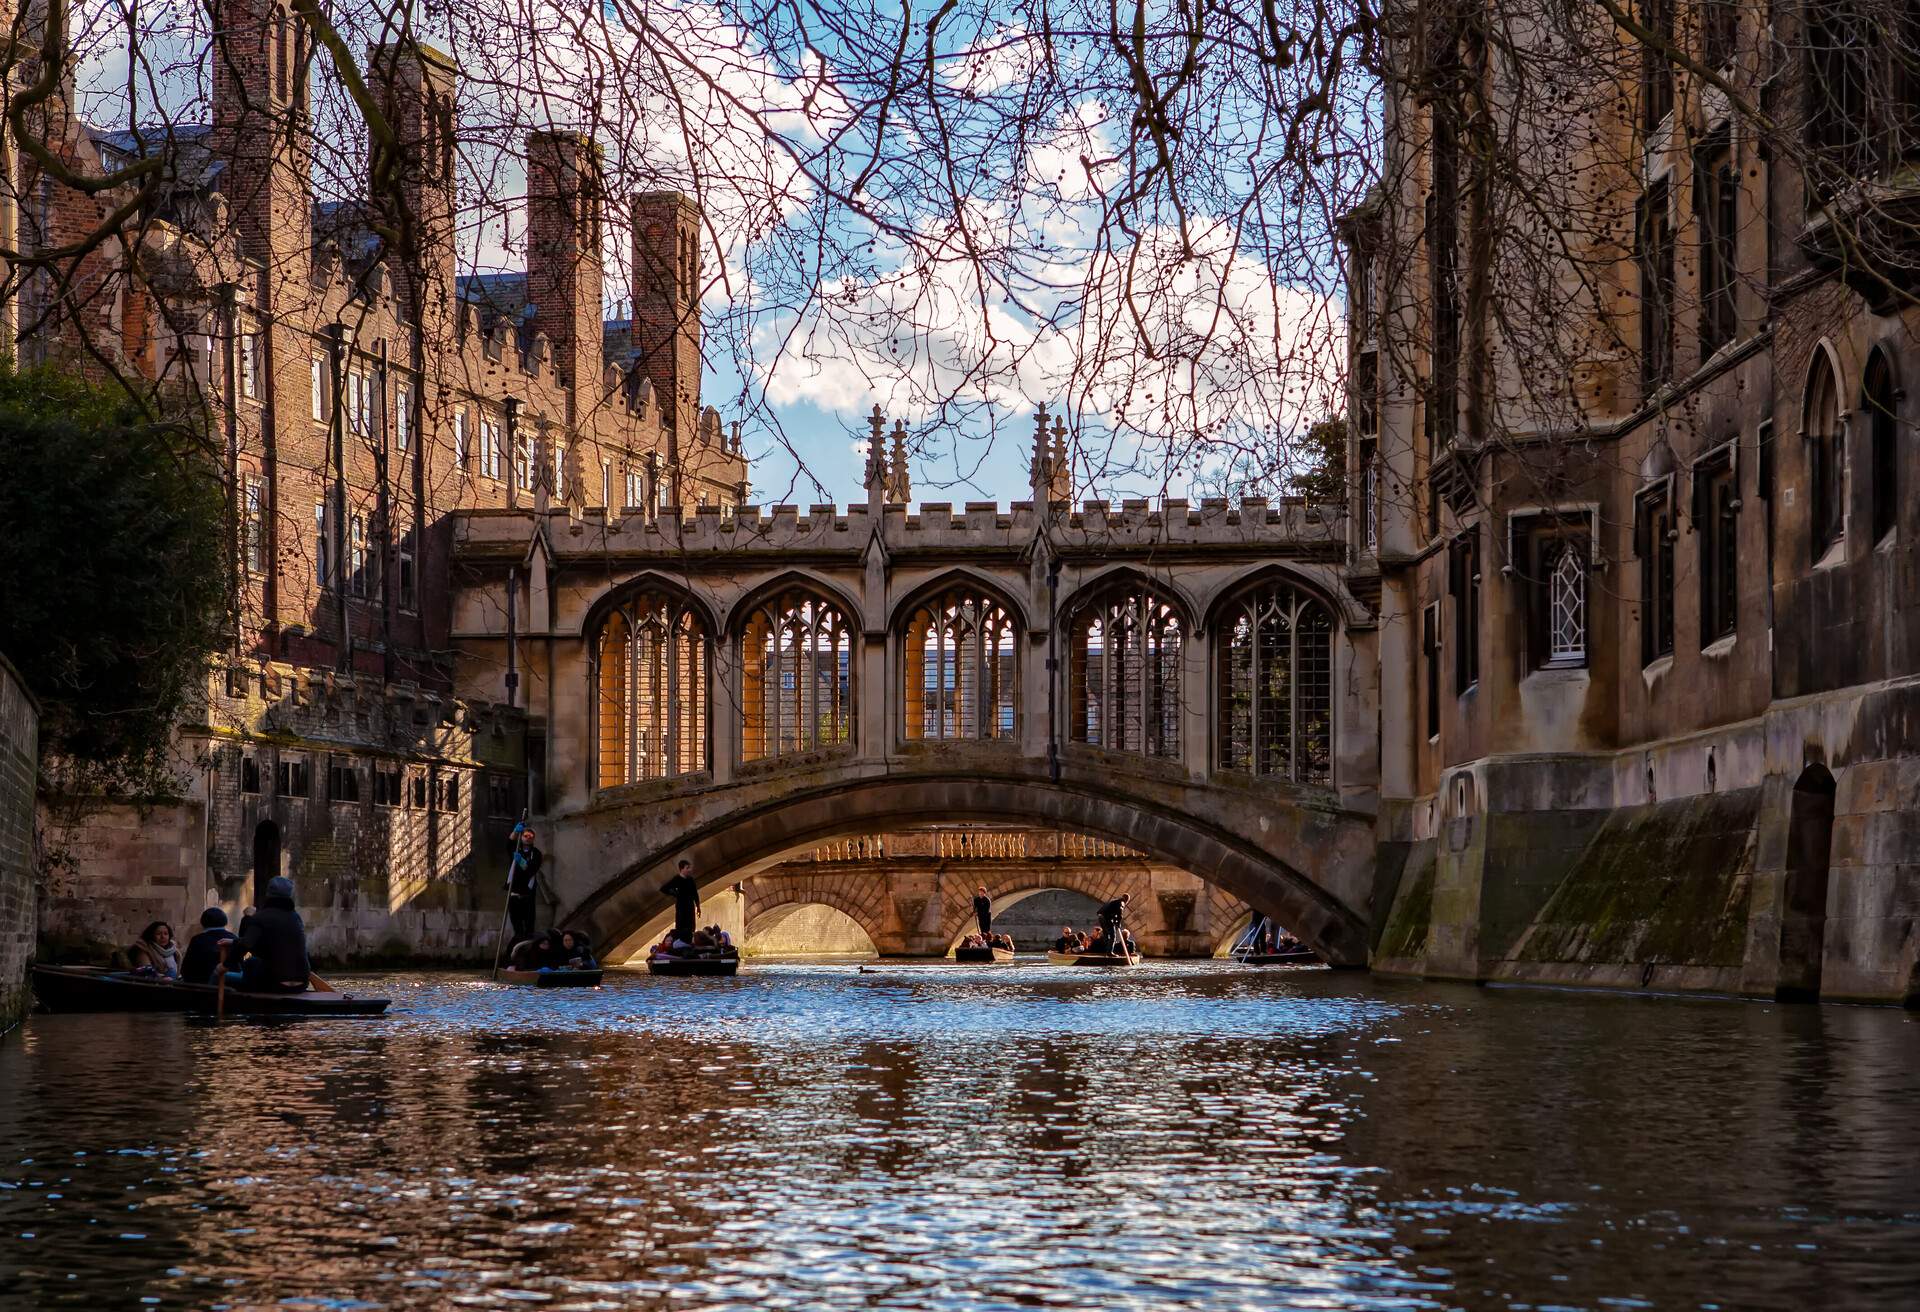 This bridge across the River Cam between the St John's College's Third Court and New Court is probably the most beautiful bridge in Cambridge. This is a view from the north of the bridge which the Kitchen Bridge can be seen in the background and the college second court is on the left.